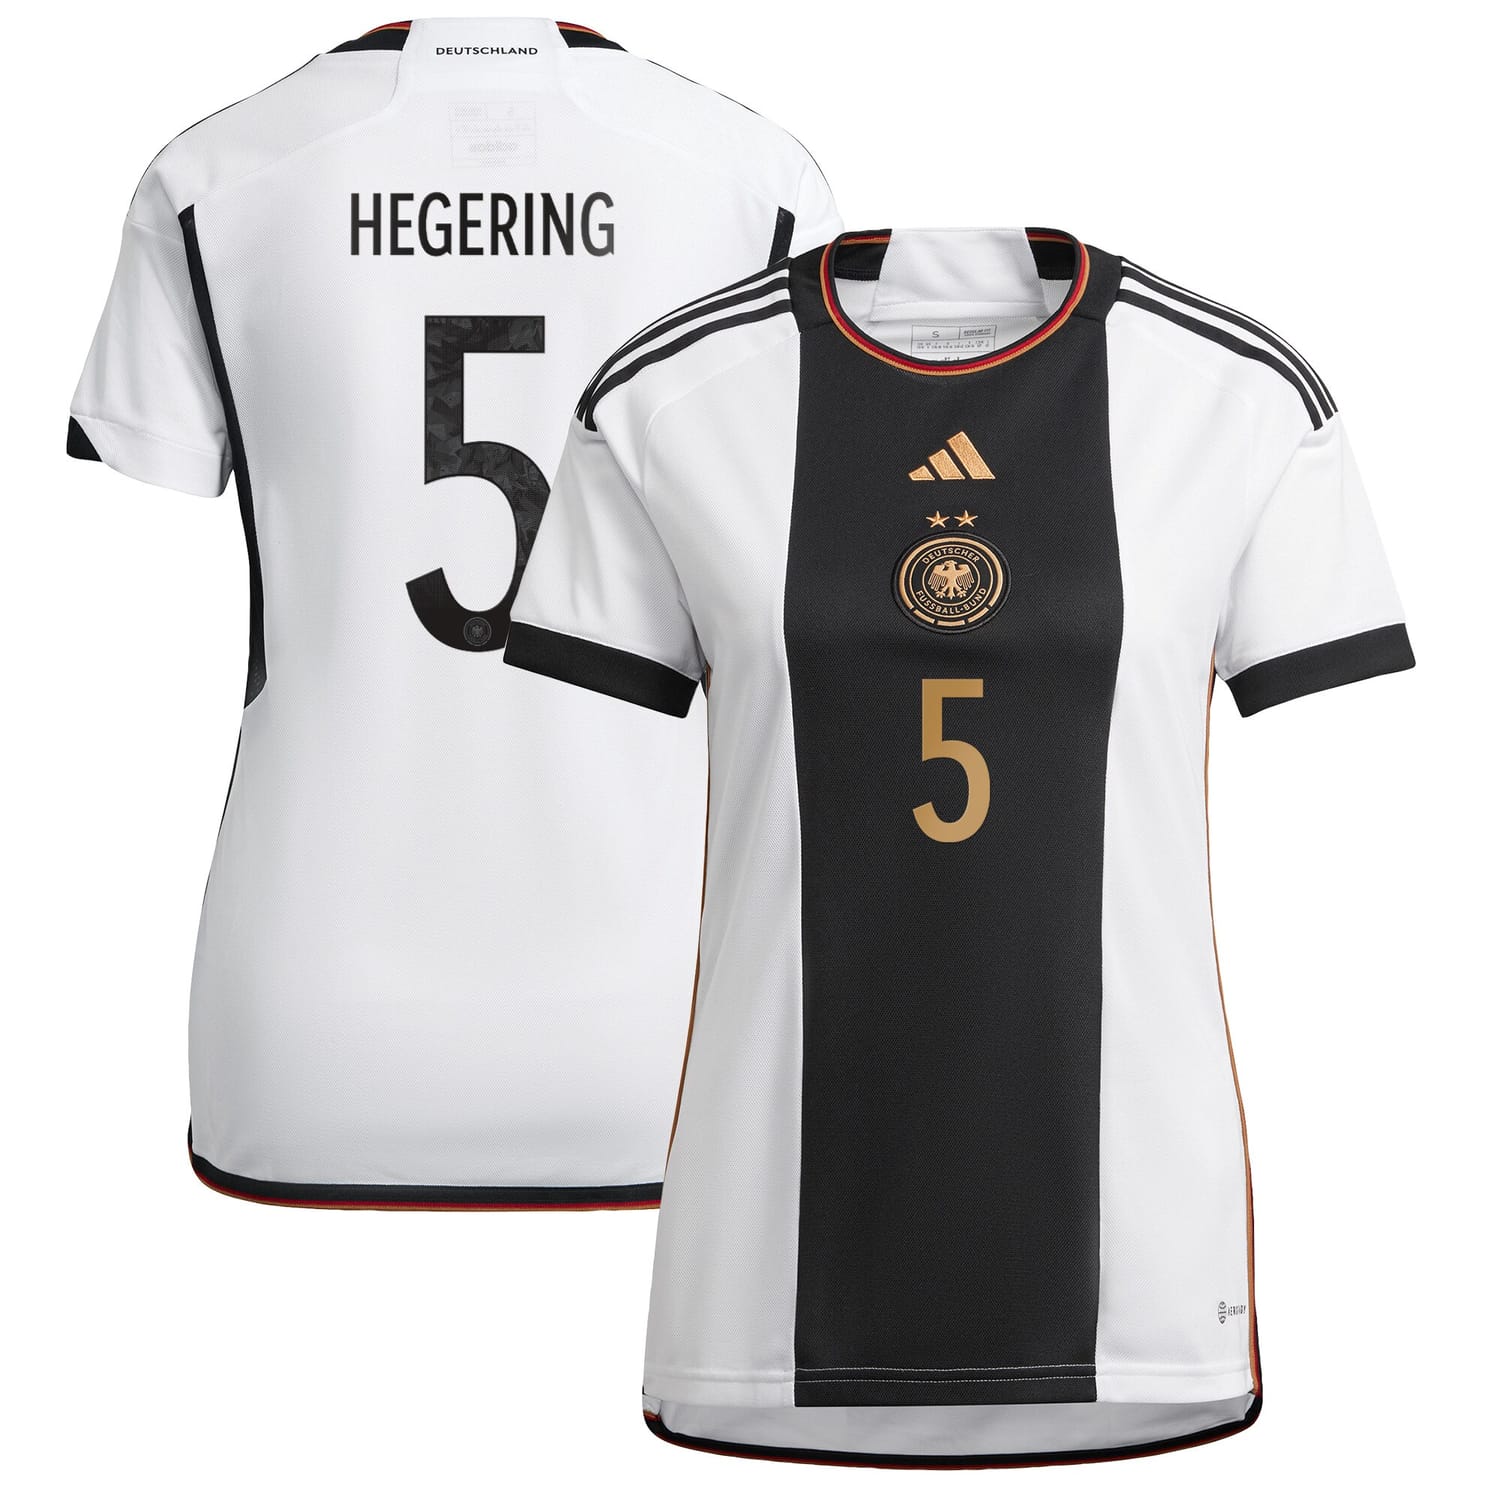 Germany National Team Home Jersey Shirt player Marina Hegering 5 printing for Women